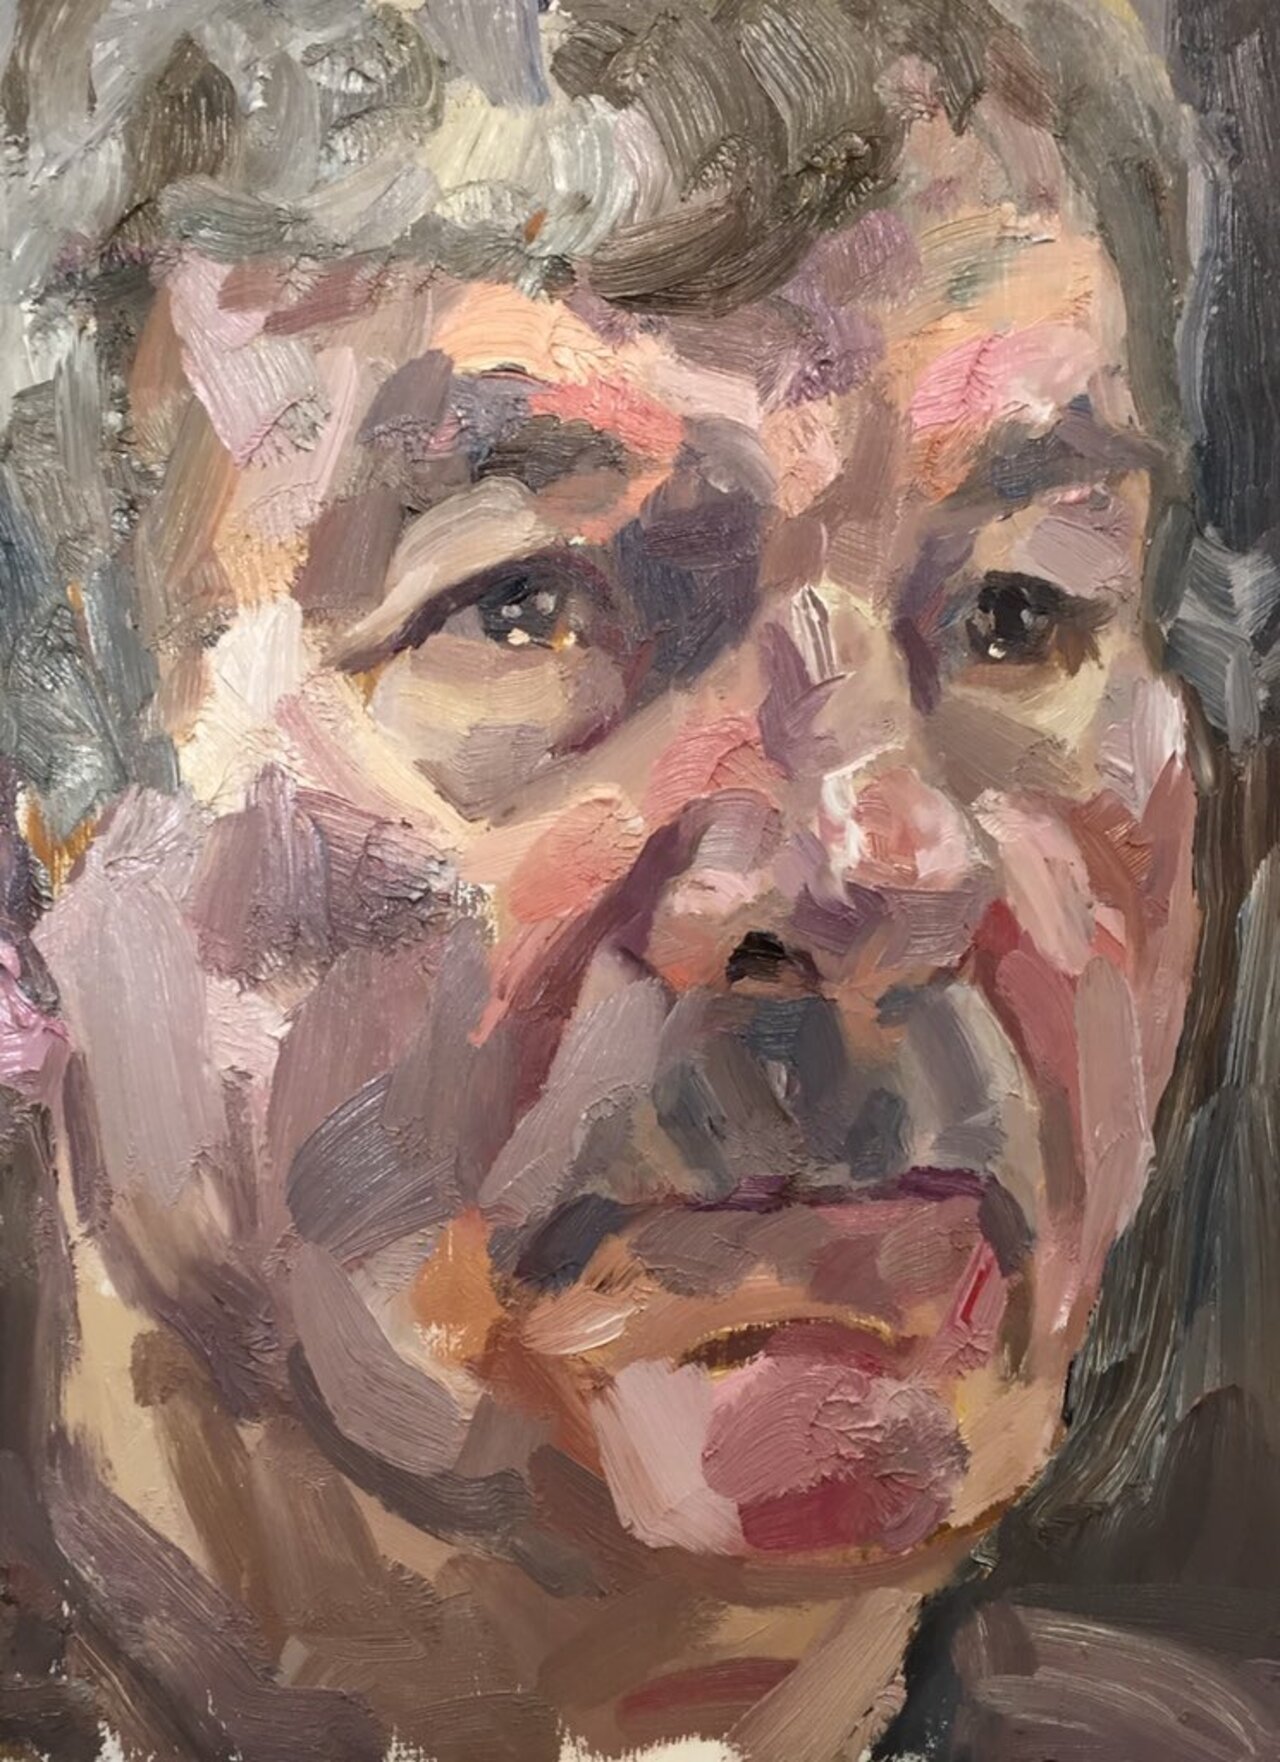 #art 'Ralph', oil on board, 16"x14". Painted just now during my Expressive Portrait painting class at @ArtAcademy https://t.co/TE0IjbN7cy